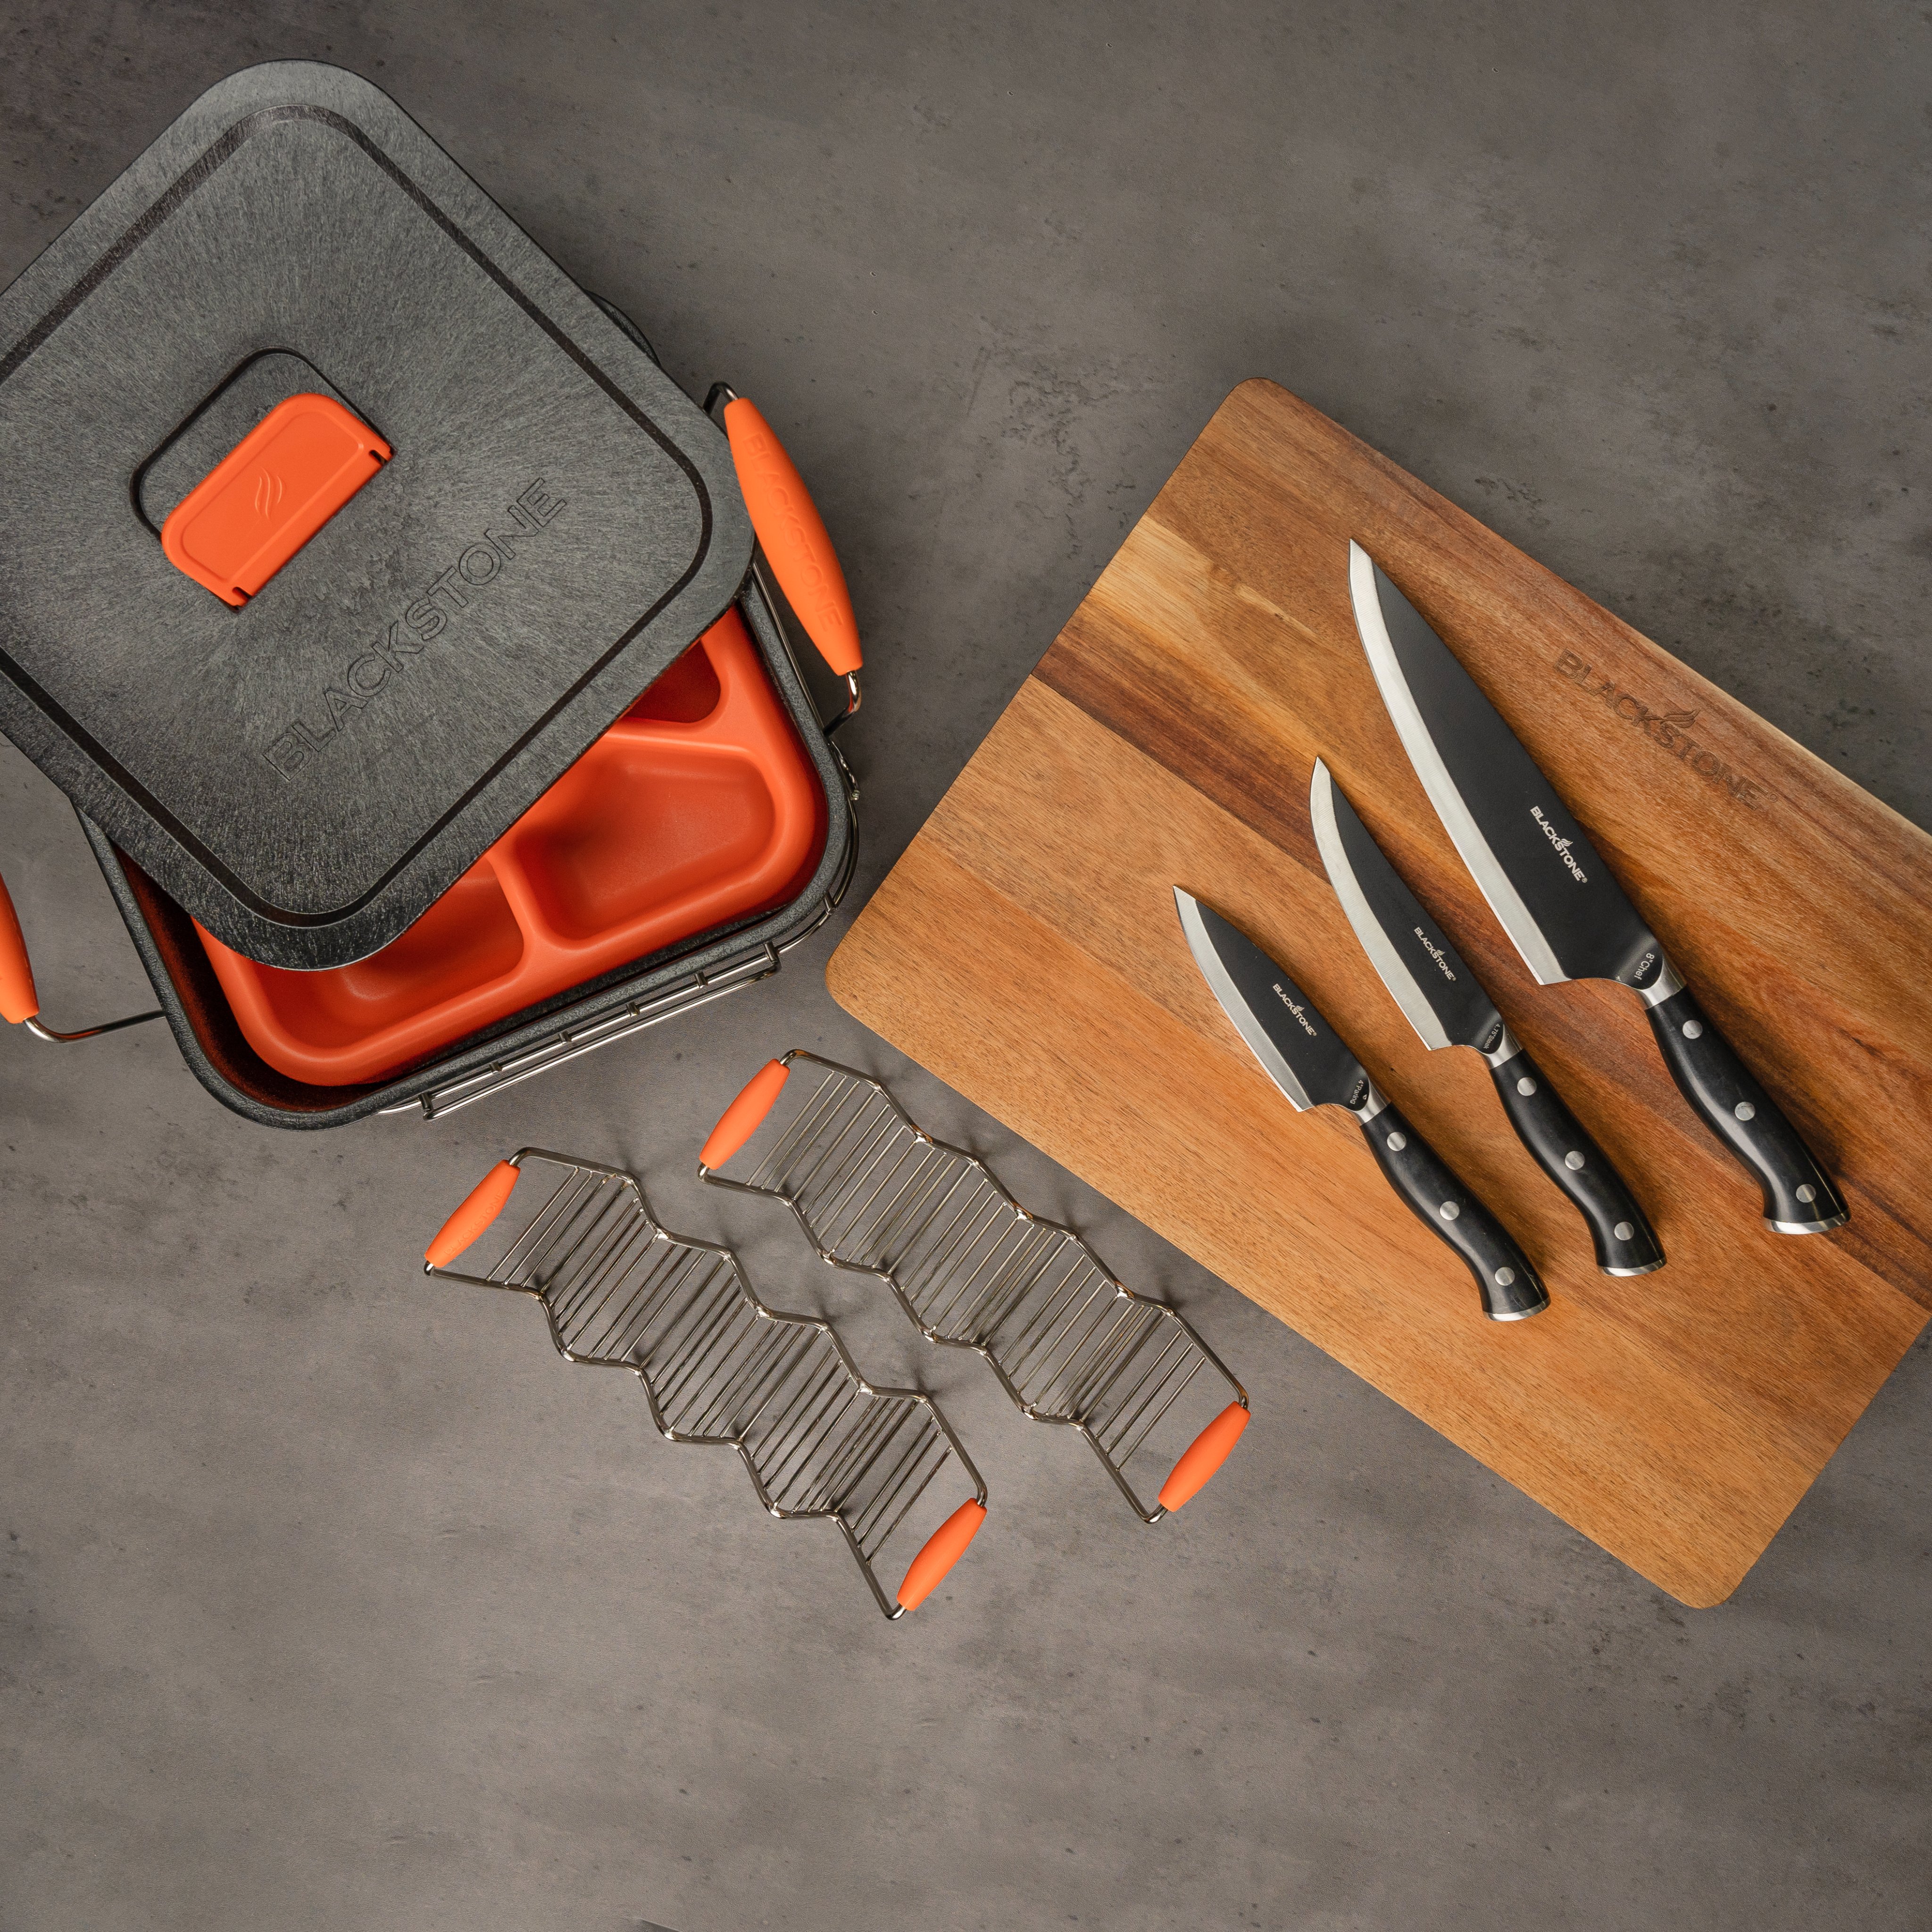 Blackstone Products on X: TACO TUESDAY You have $10 to make your perfect  taco, what are you picking!? Today's prize: Blackstone knives, cutting  board, and taco kit! TO ENTER: Build your perfect